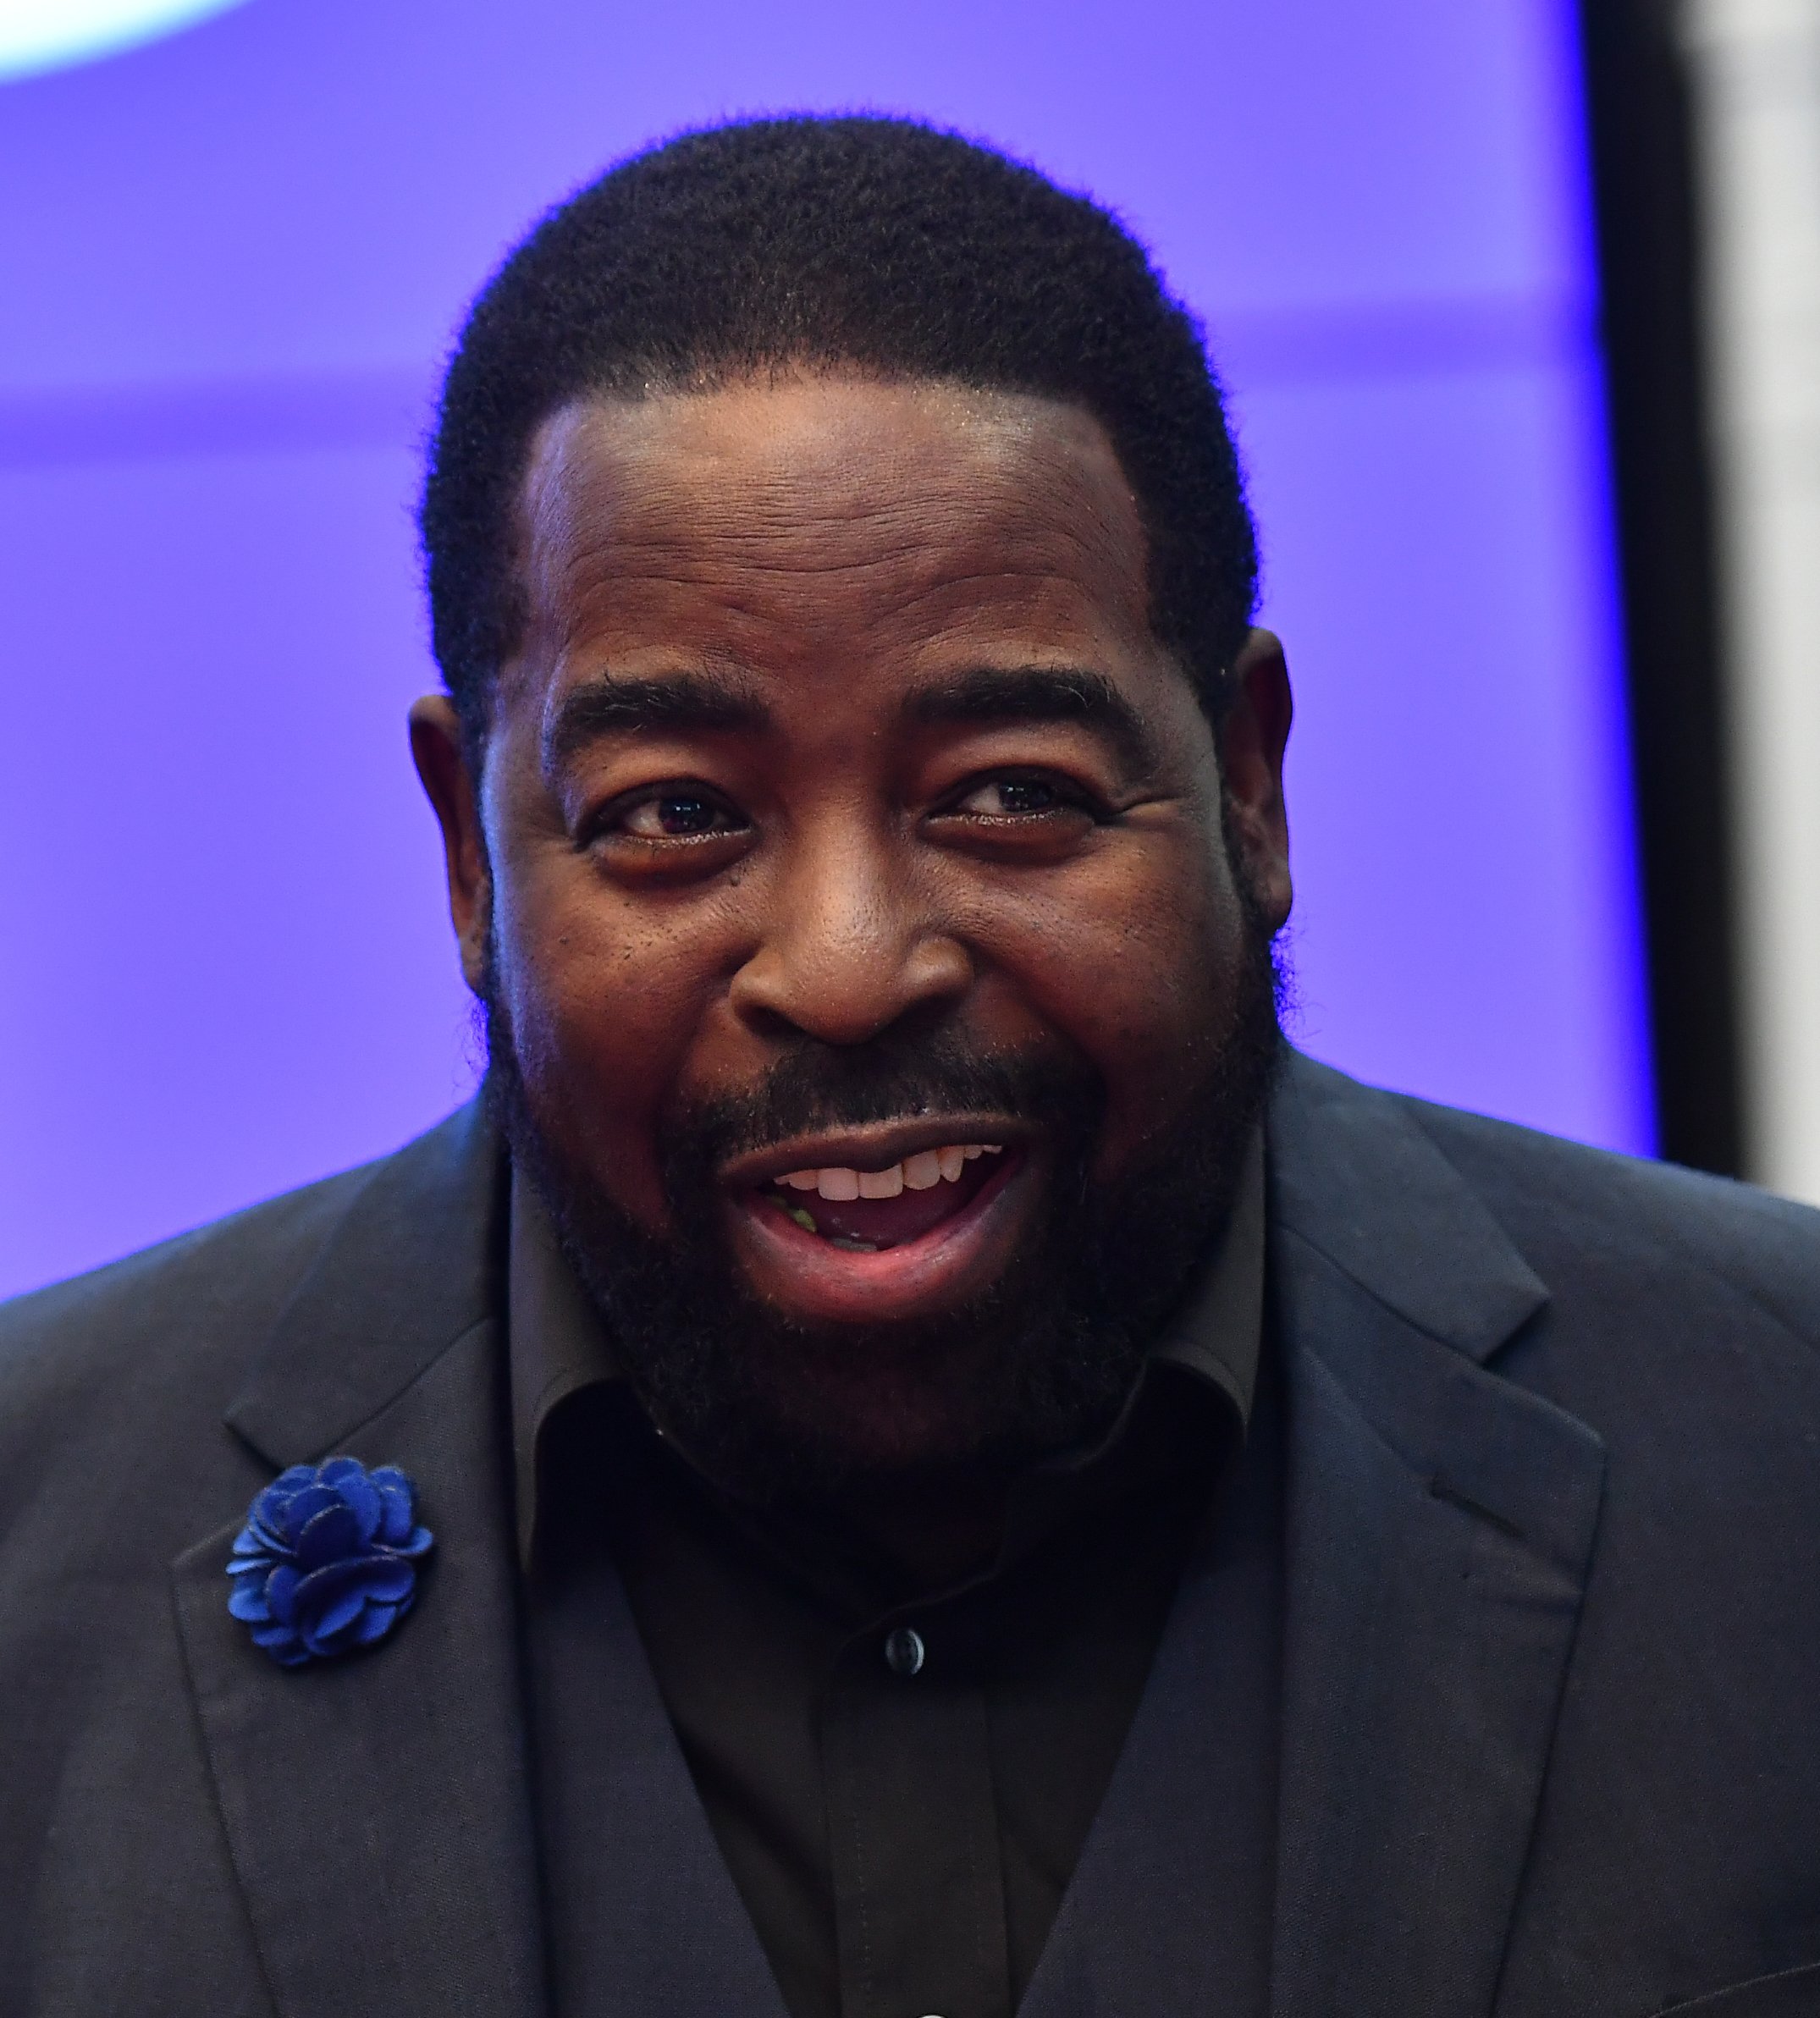 Les Brown at A Celebration of Women For Abrams on September 22, 2018, in Atlanta, Georgia. | Source: Paras Griffin/Getty Images